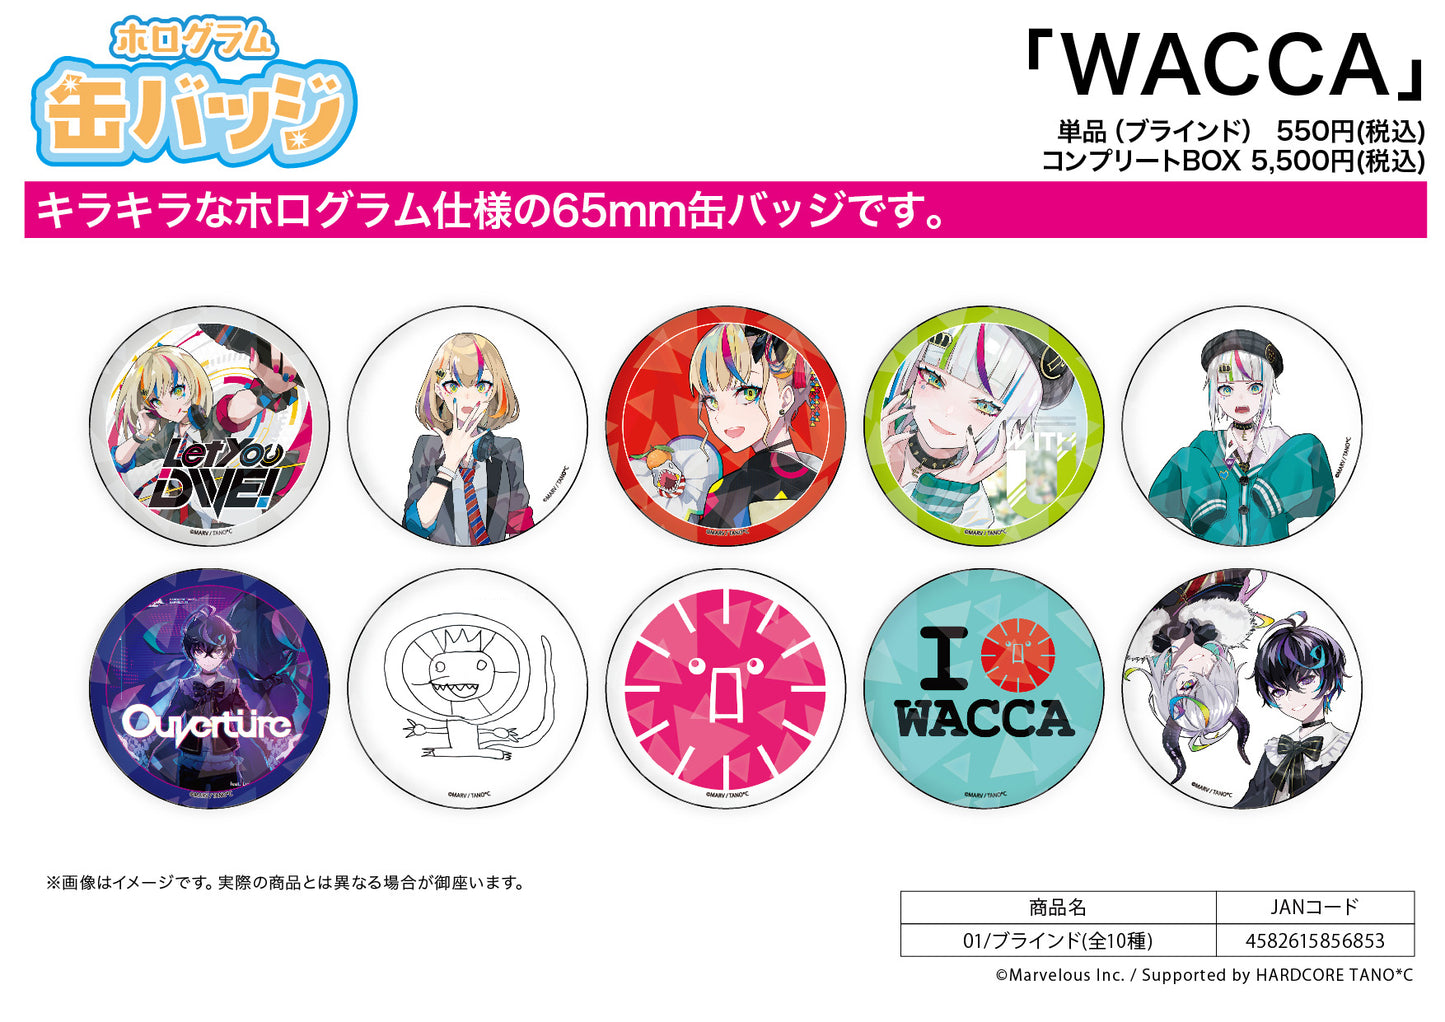 Hologram Can Badge (65mm) "WACCA" 01